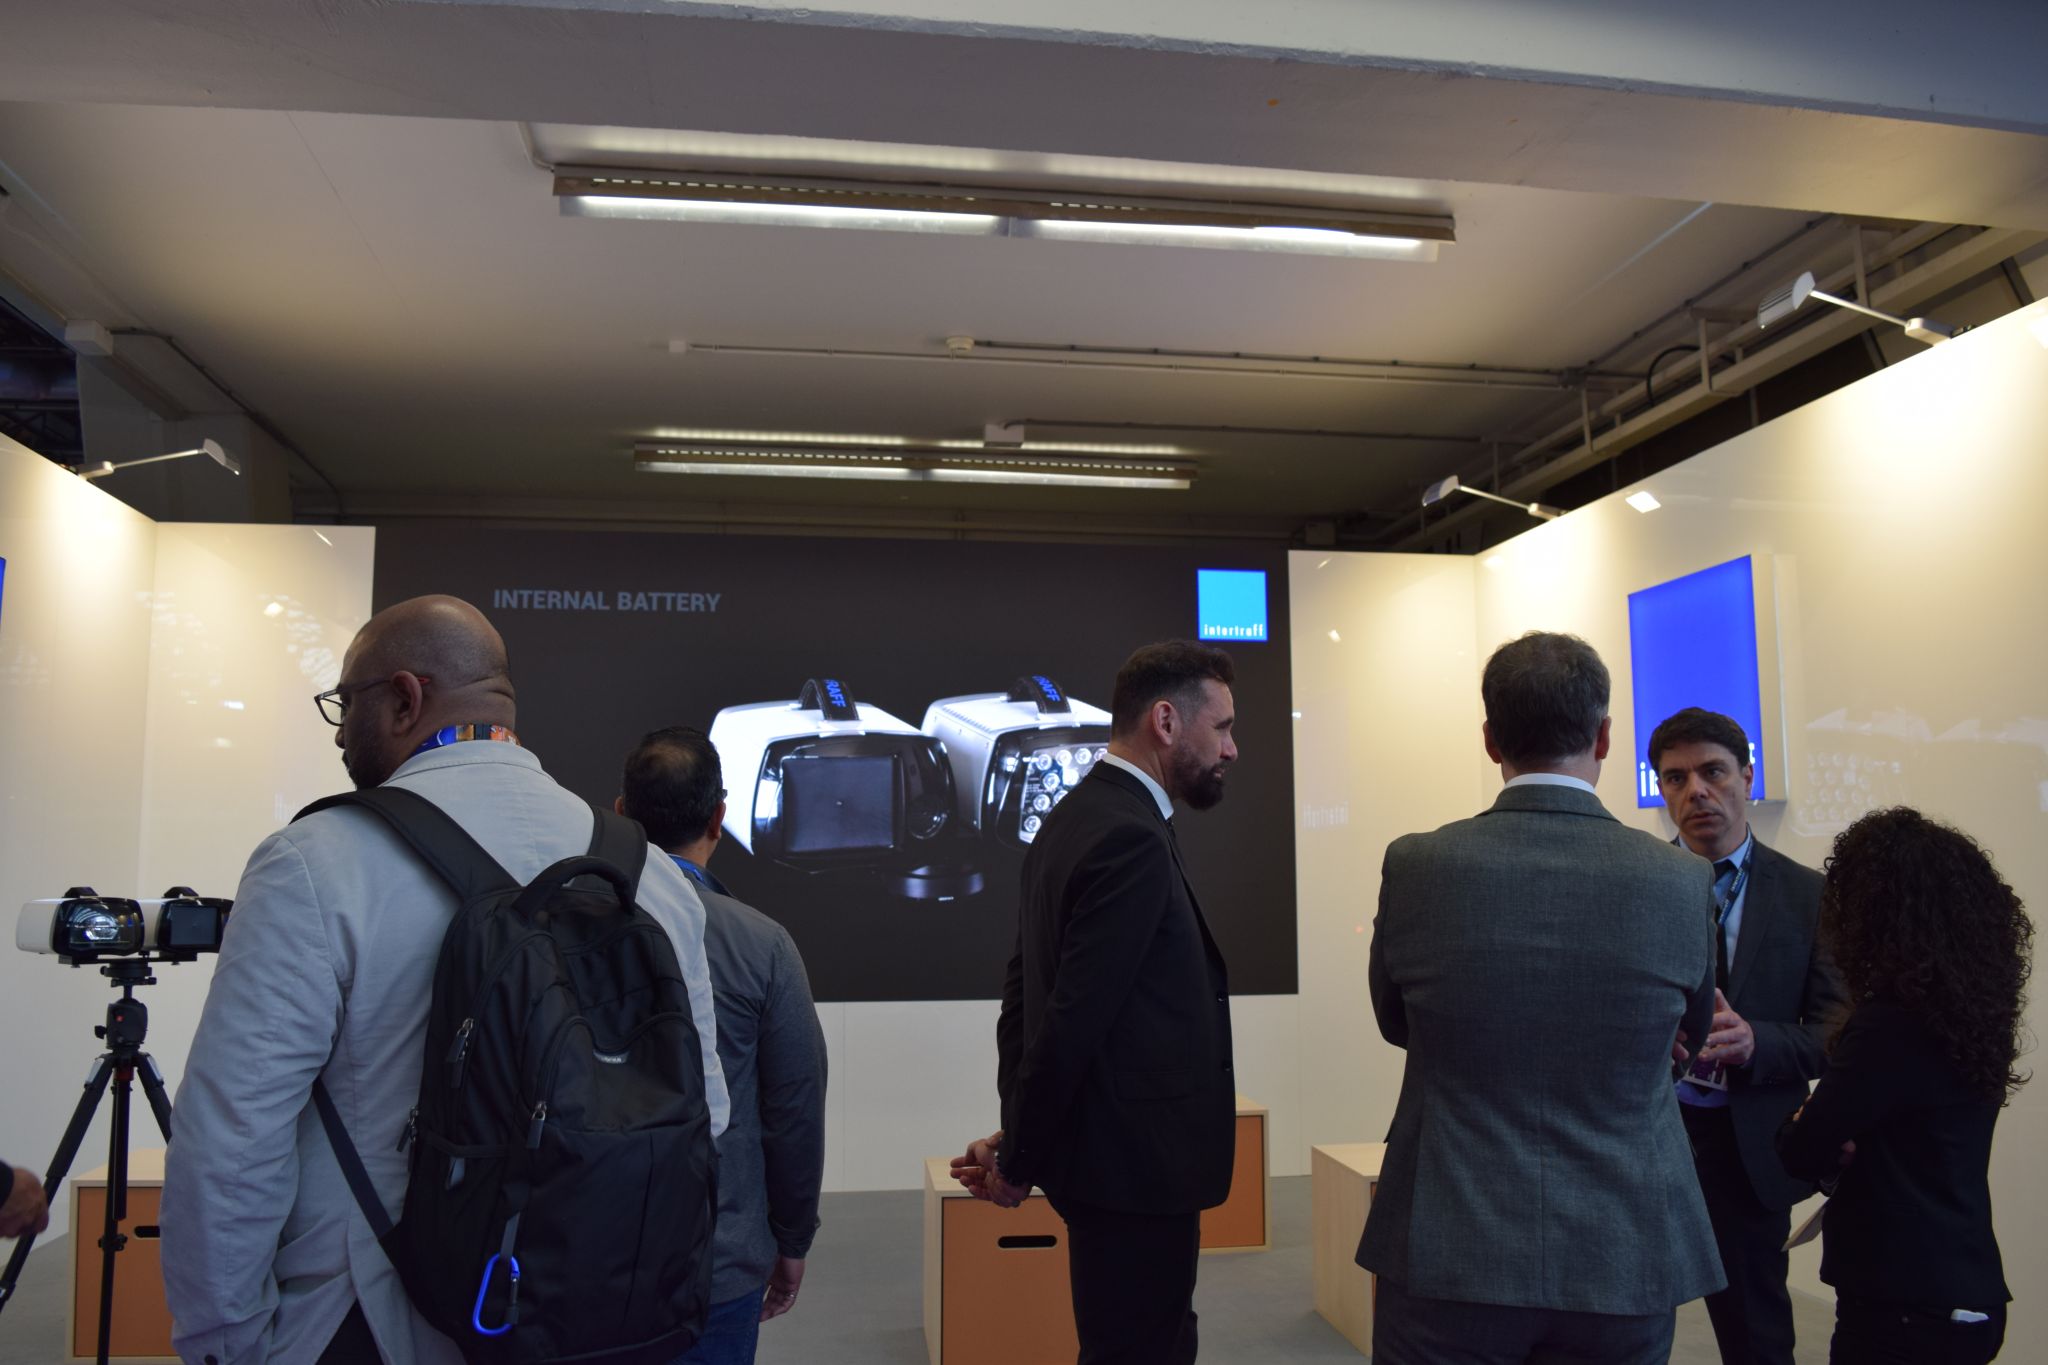 Day Two at Intertraffic Amsterdam – A Resounding Success!